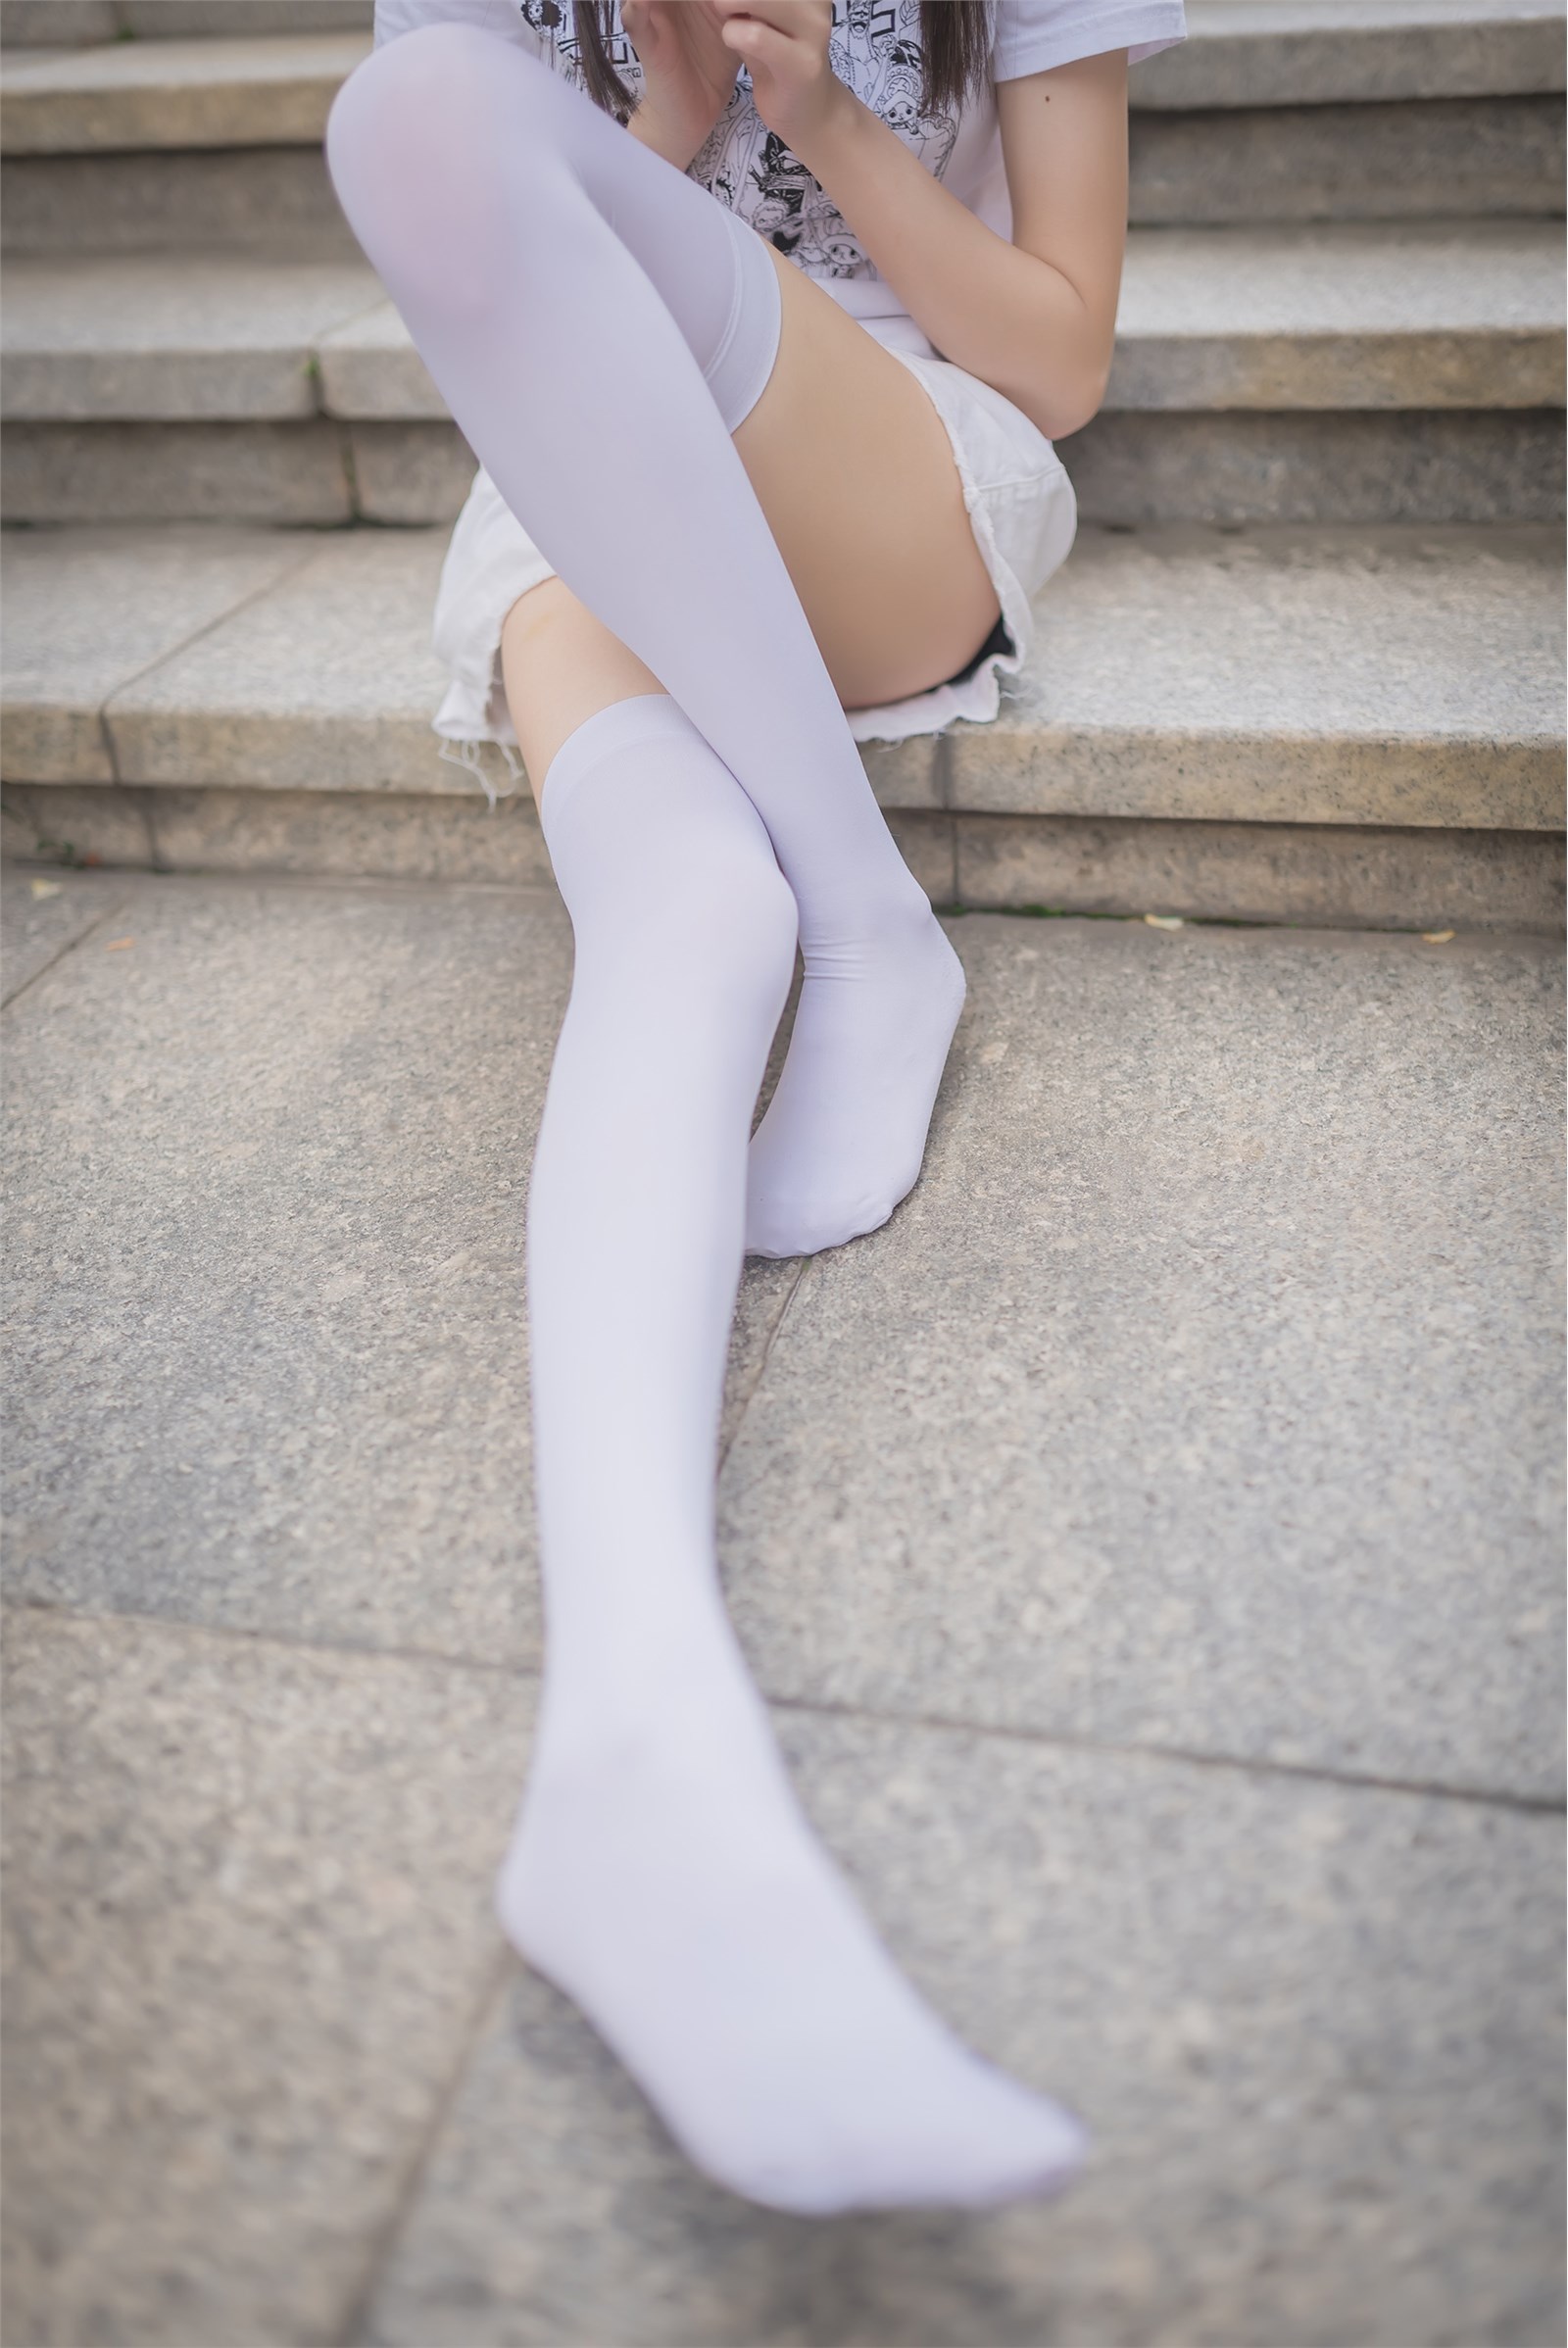 Rabbit plays with painted white stockings over the knee(1)